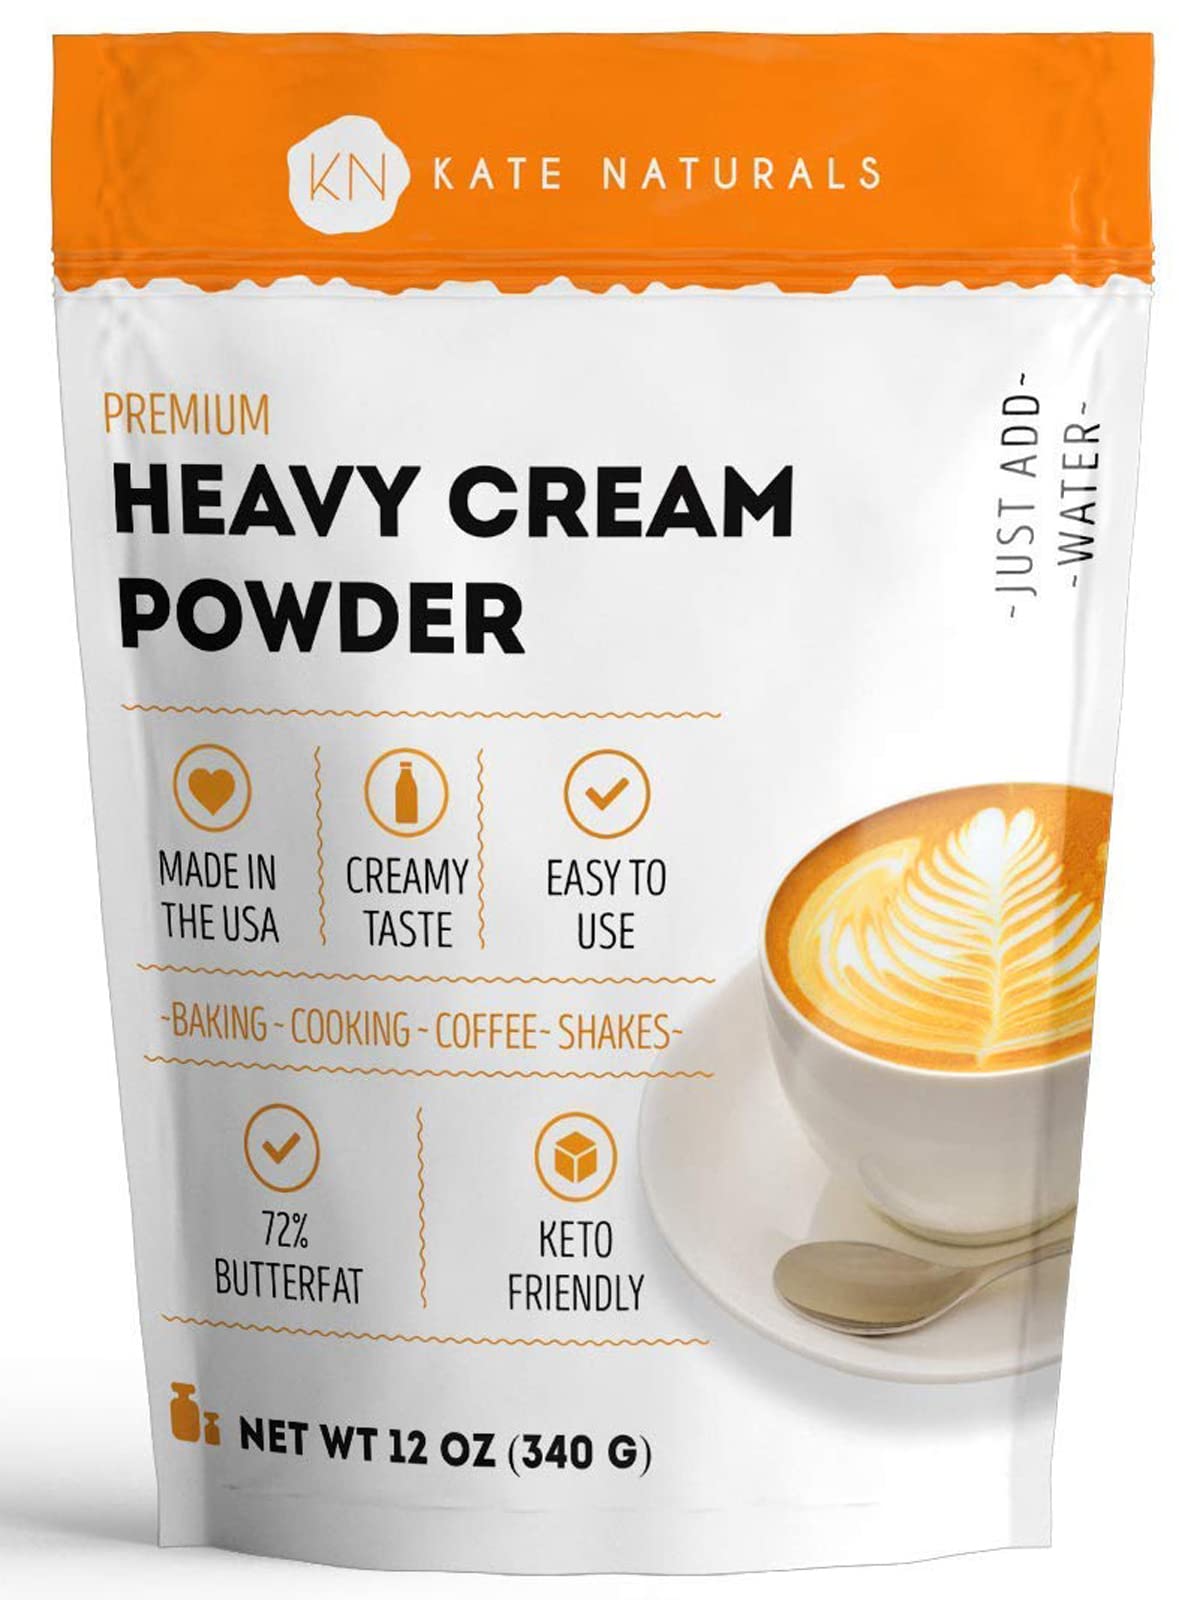 Heavy Cream Powder for Coffee & Heavy Whipping Cream (12oz) - Kate  Naturals. Powdered Cream for Sour Cream, Butter, Clotted and Whipped Cream.  Instant